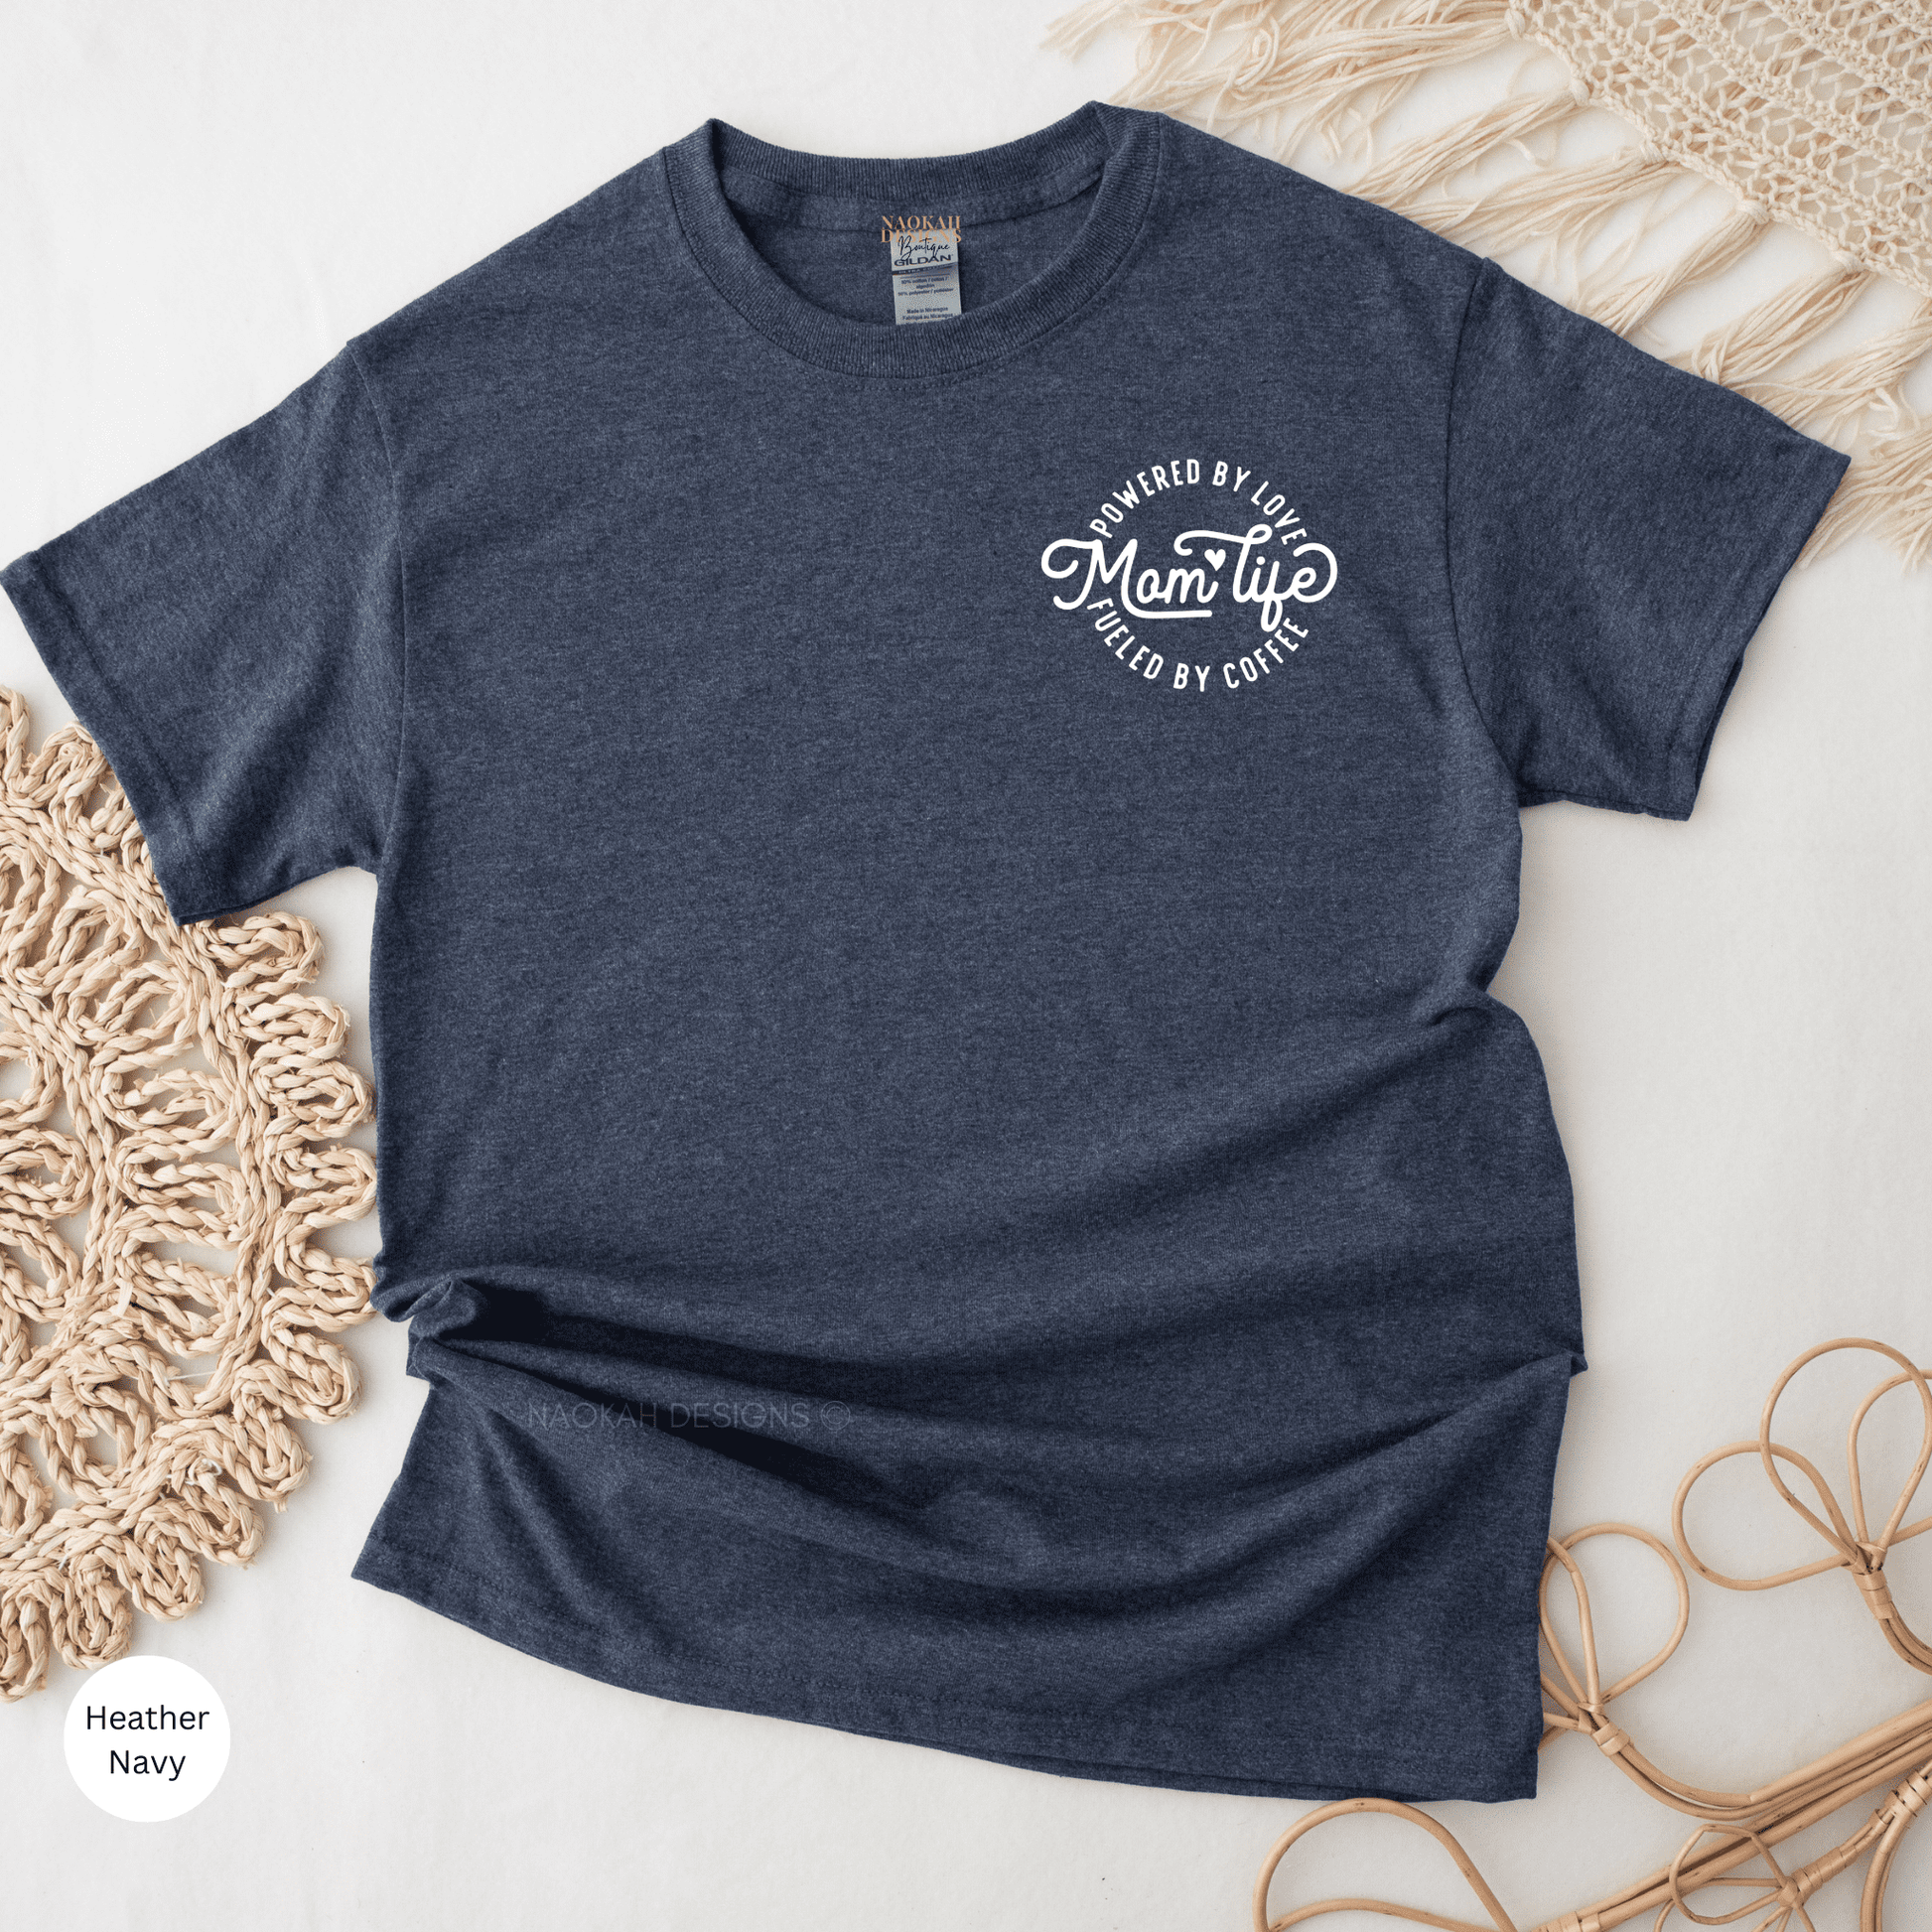 Mom Life Powered By Love Fueled By Coffee Shirt, Loving Mom Shirt, Love Coffee Shirt, Funny Mom Shirt, Mother's Day Shirt, New Mom Gift